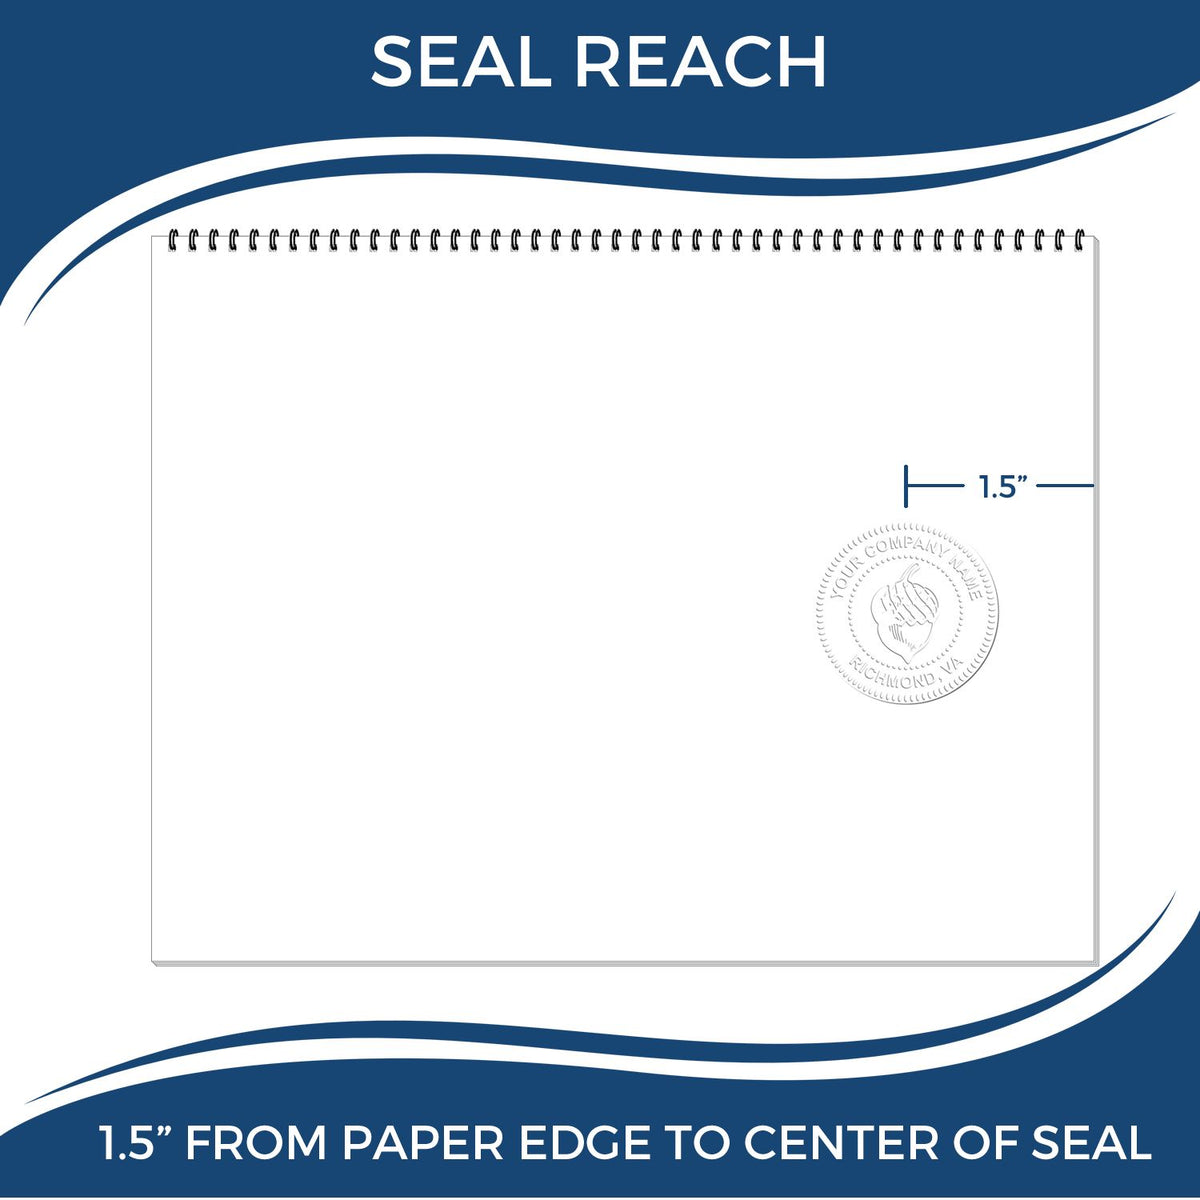 An infographic showing the seal reach which is represented by a ruler and a miniature seal image of the Gift North Dakota Engineer Seal